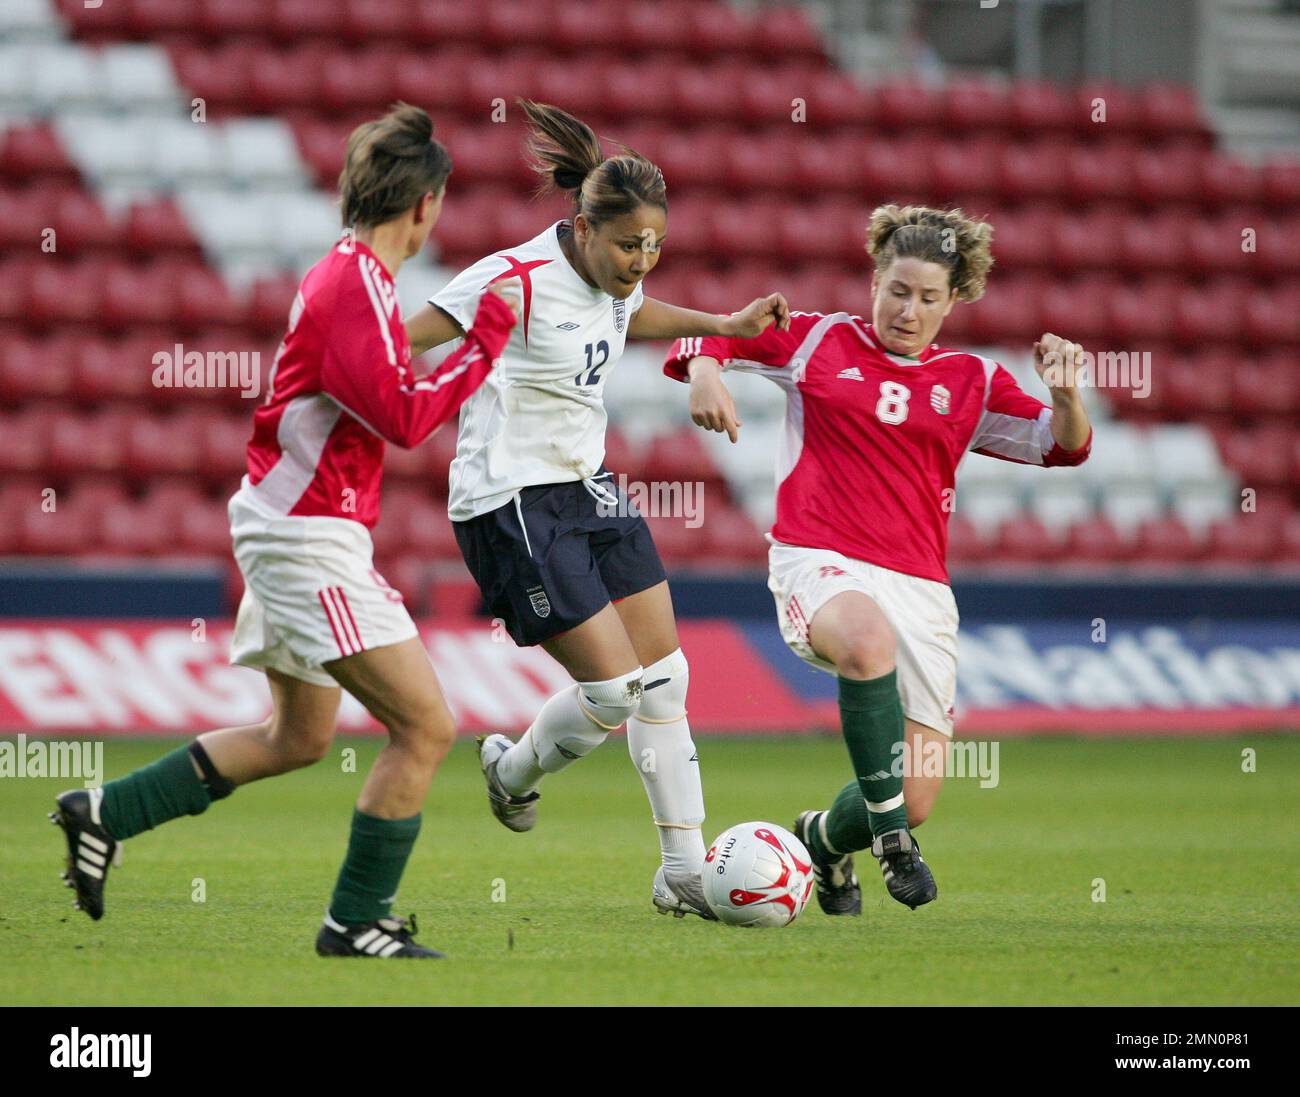 England v Hungary Women's football 2006 World Cup Qualifier  at St Marys stadium Southampton. Englands Alex Scott in action. image is bound by Dataco restrictions on how it can be used. EDITORIAL USE ONLY No use with unauthorised audio, video, data, fixture lists, club/league logos or “live” services. Online in-match use limited to 120 images, no video emulation. No use in betting, games or single club/league/player publications Stock Photo